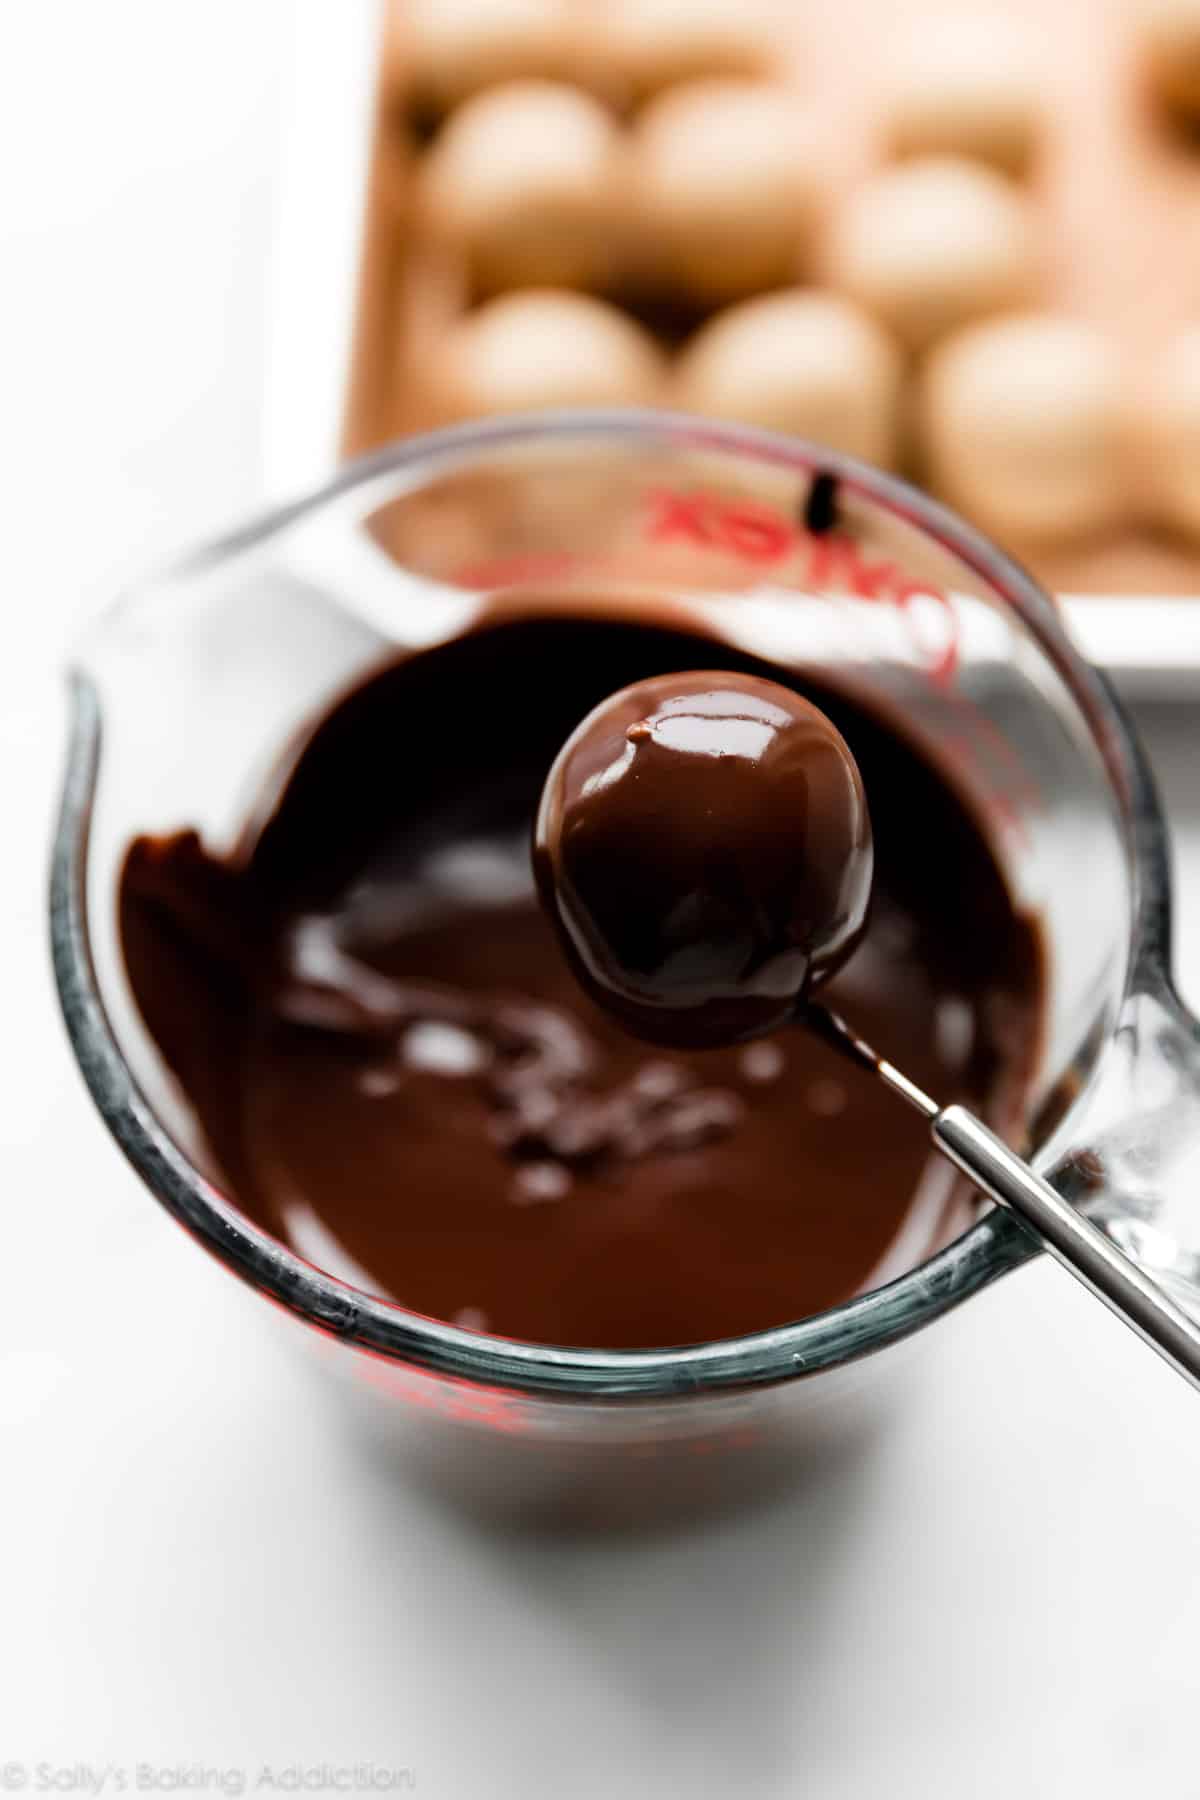 dipping peanut butter balls in chocolate